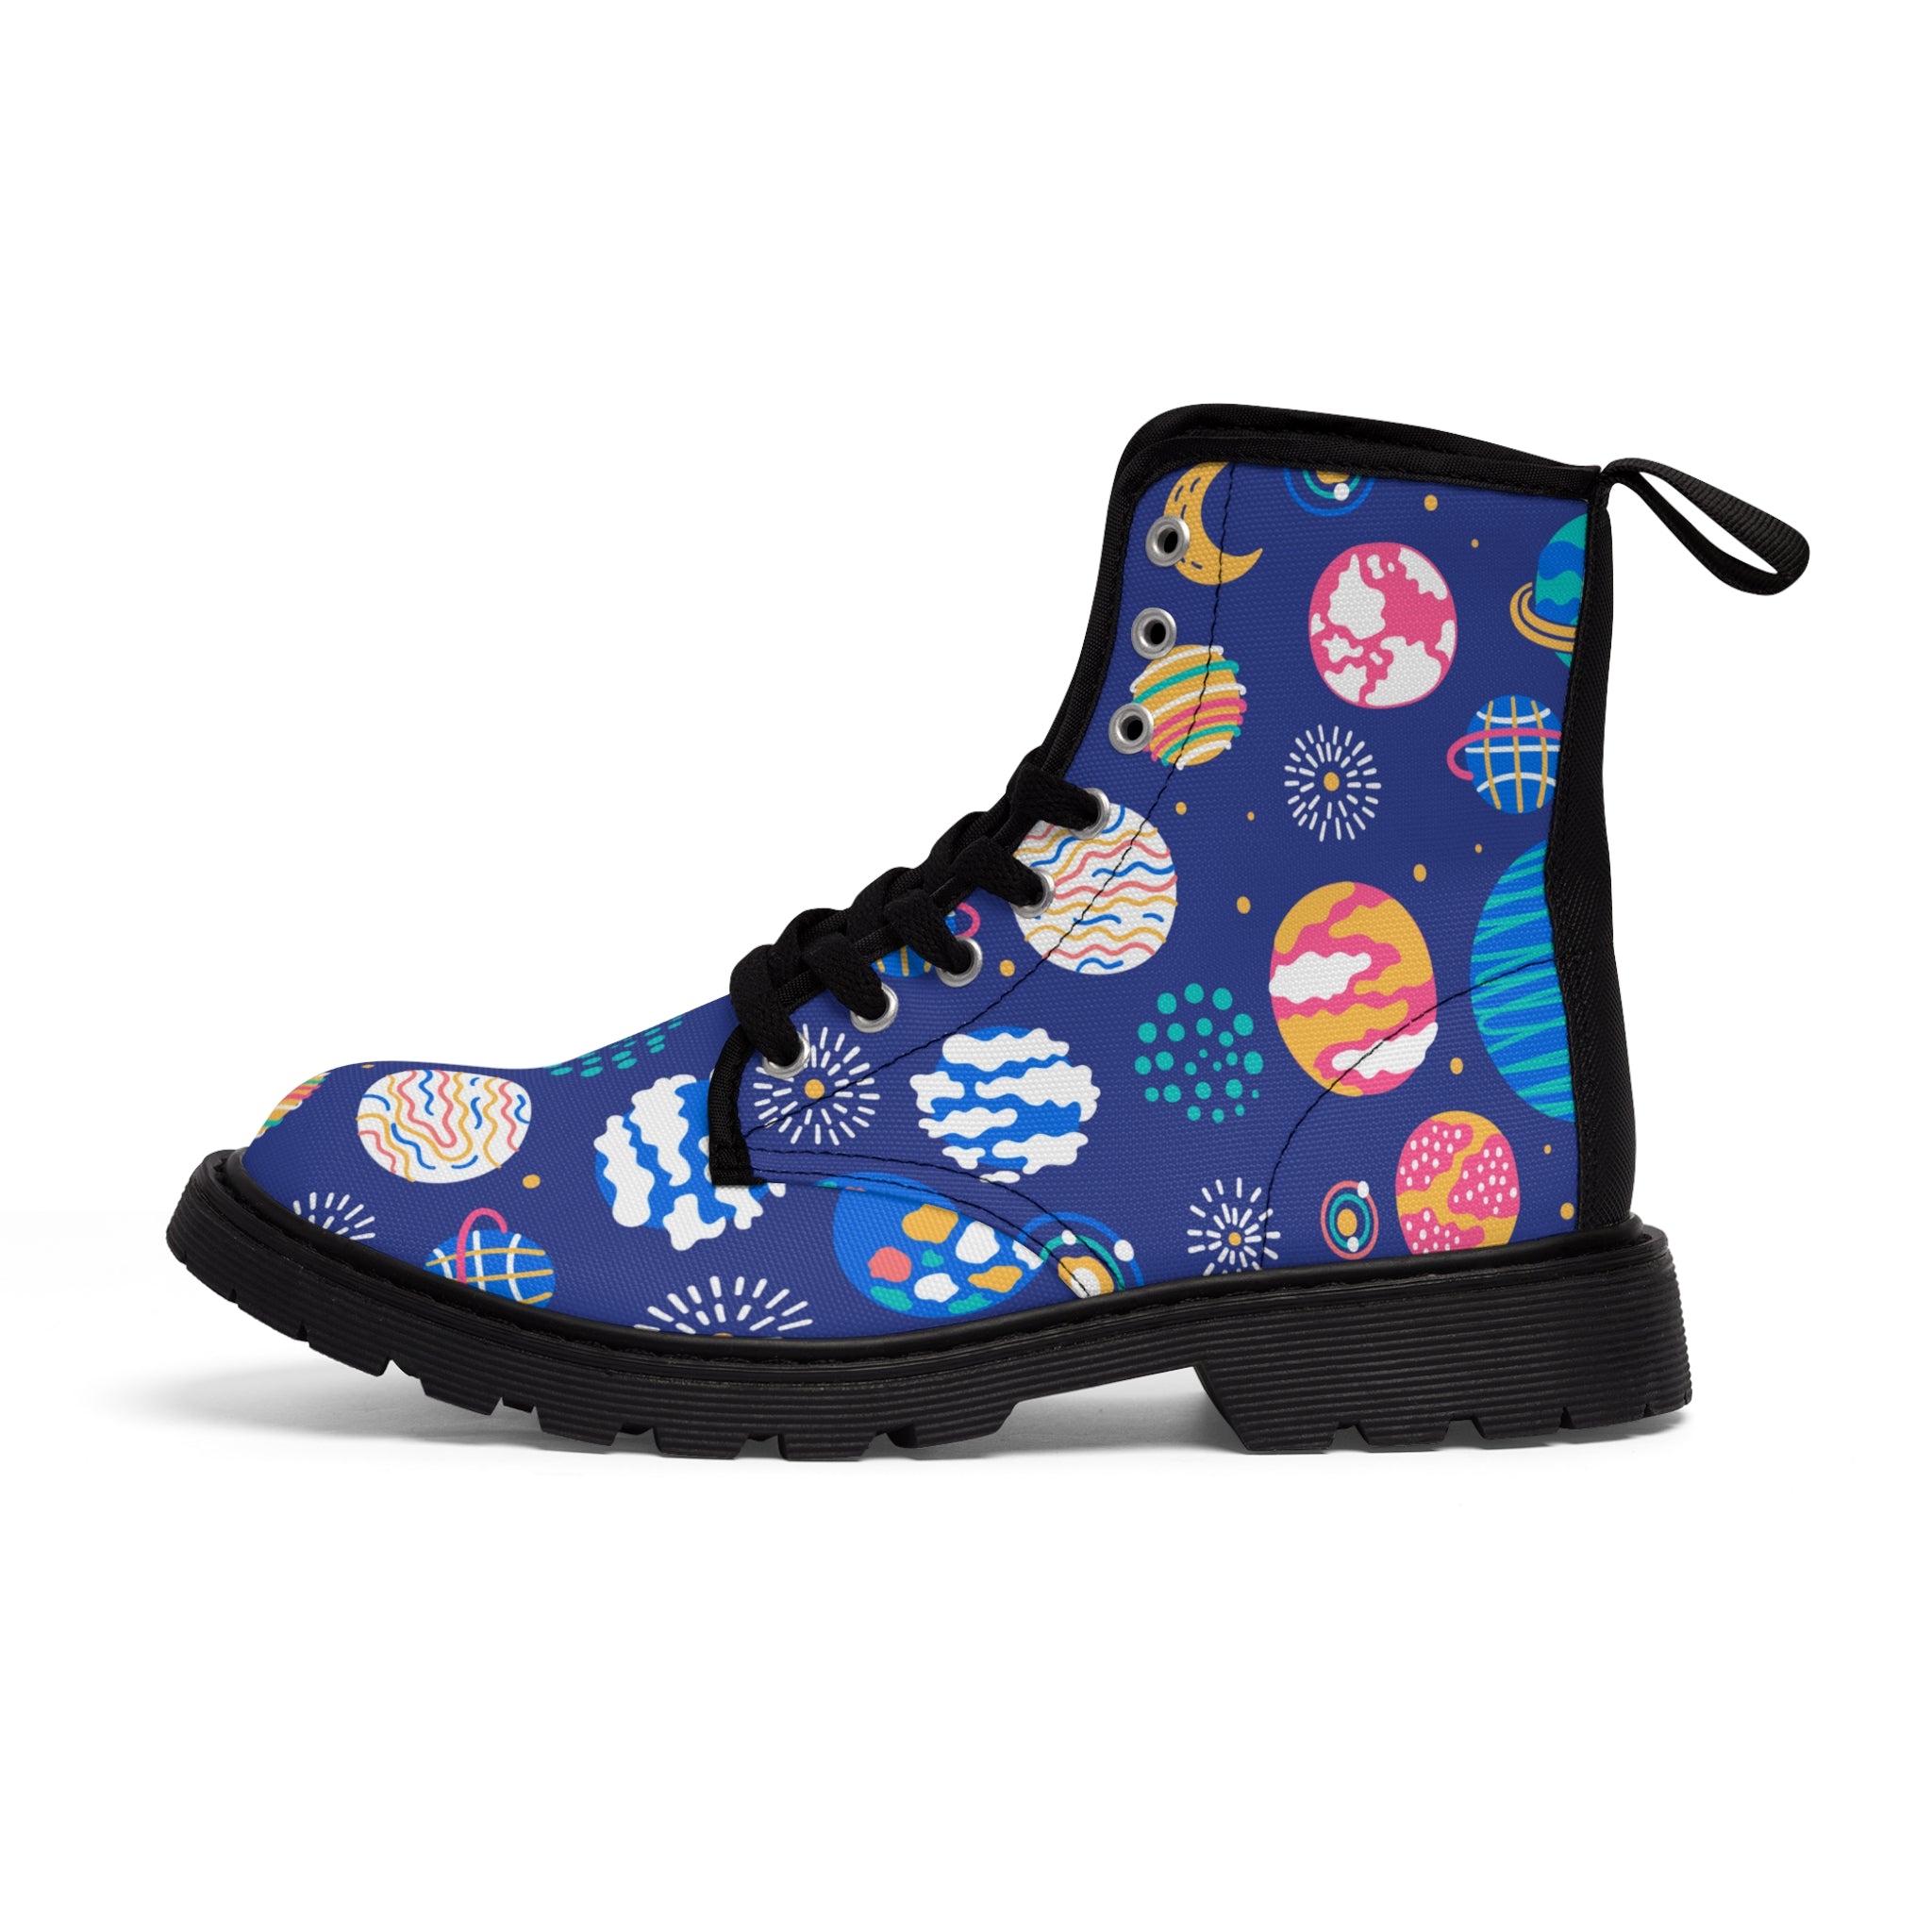 Custom Designer Canvas Lace up Boots for Women with Planet Prints in Black for a Space Enthusiast